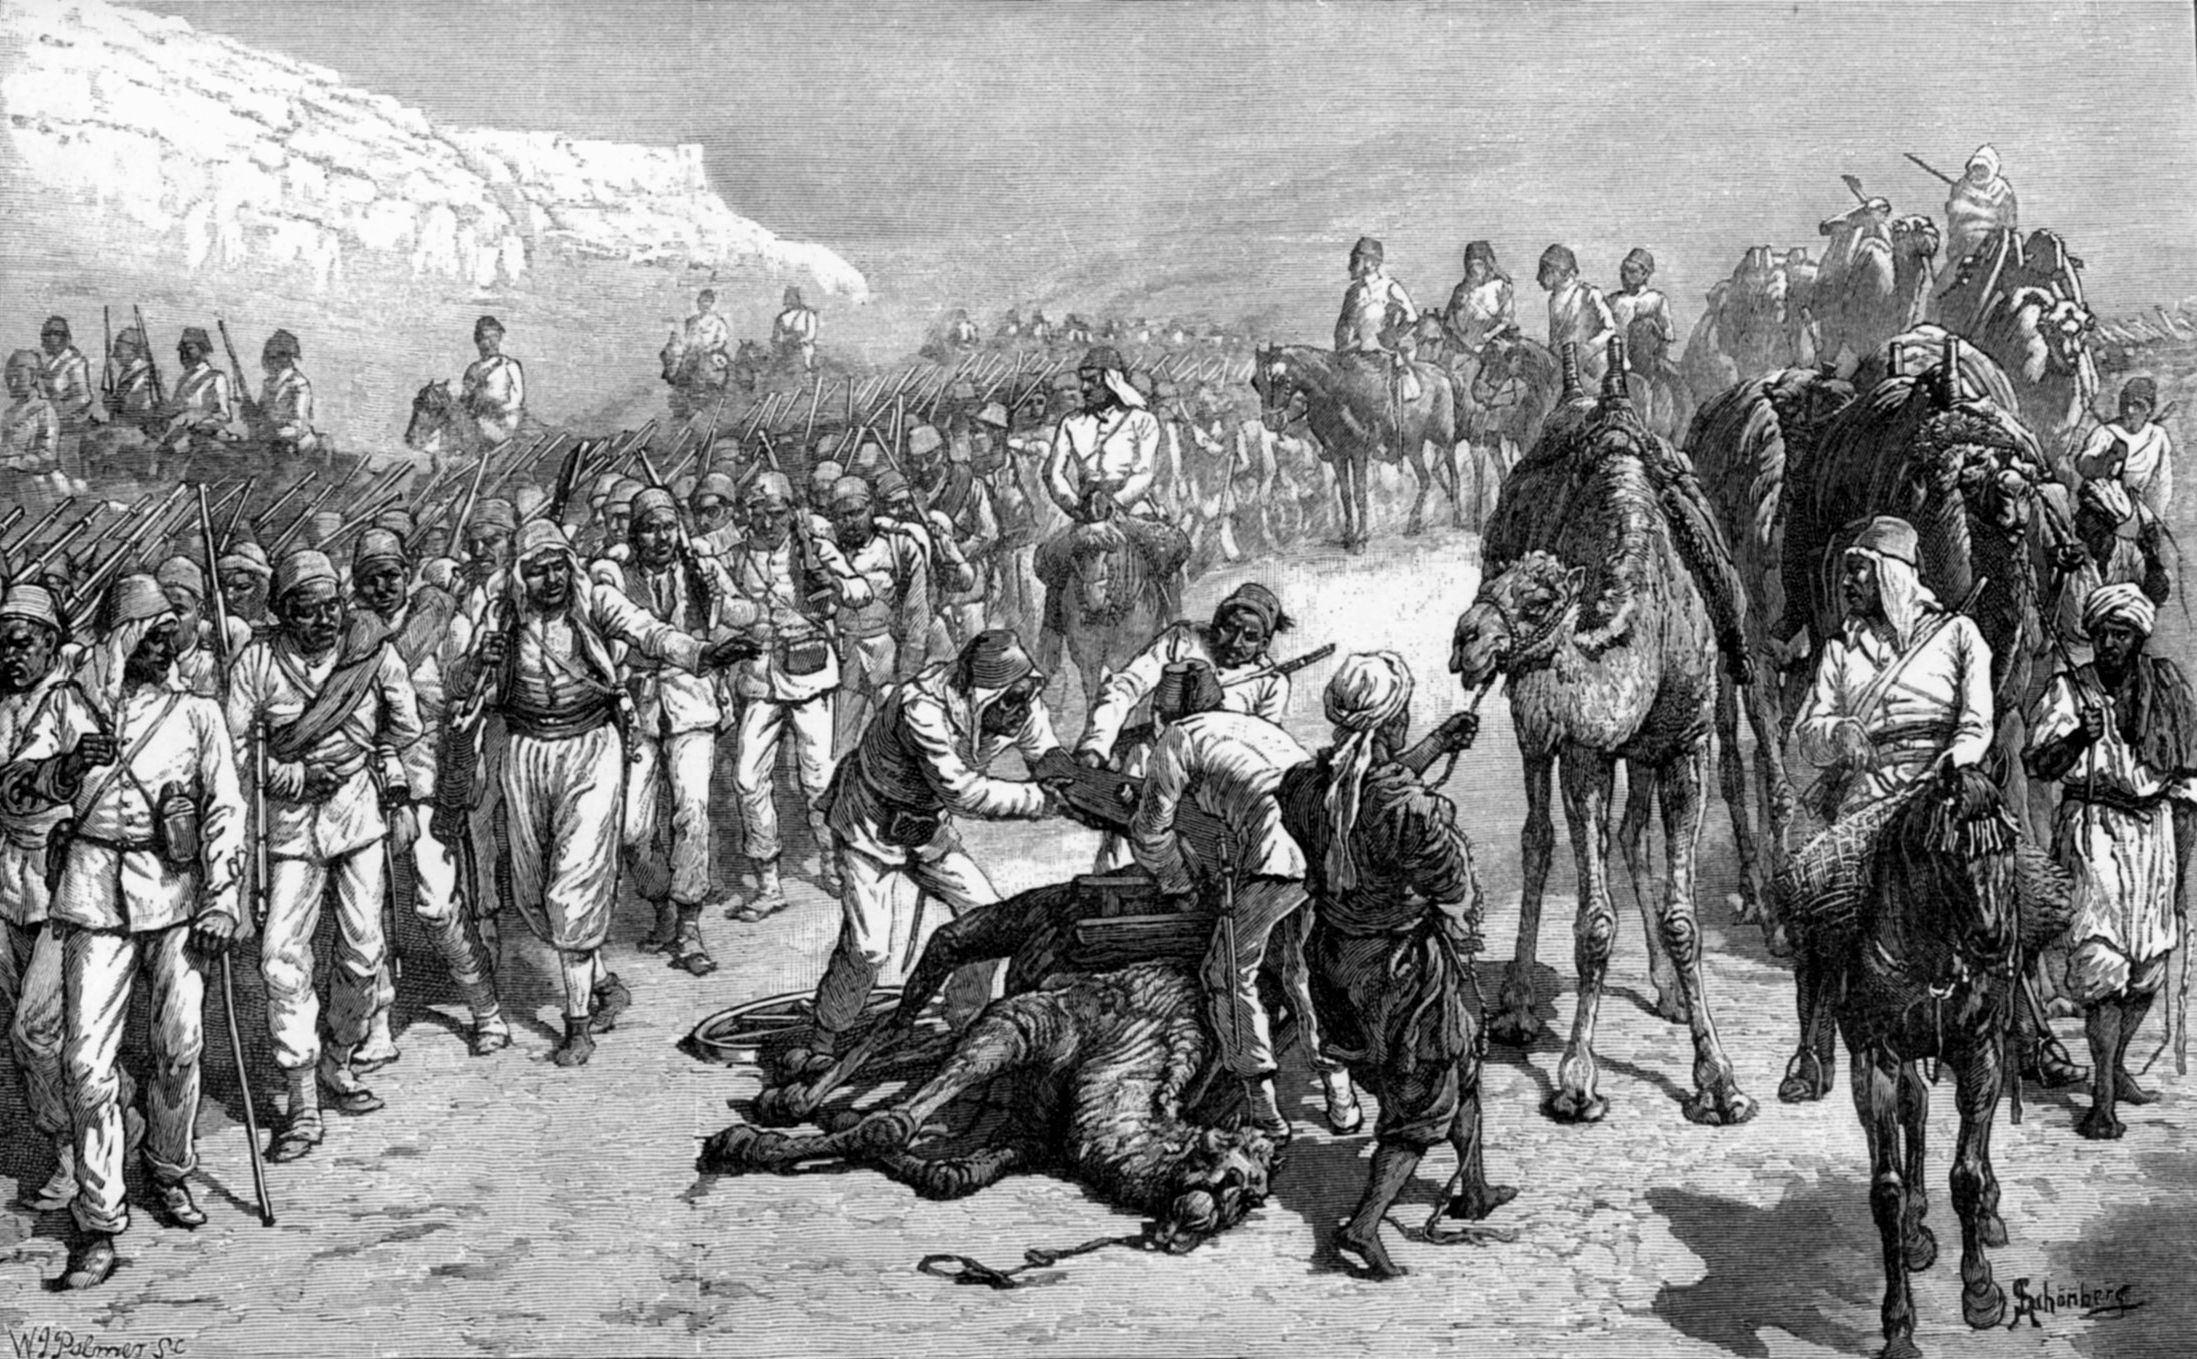 Hick's army goes on the march. The training motivation, and discipline of the Egyptians were abominable. Here an overloaded camel falls dead.